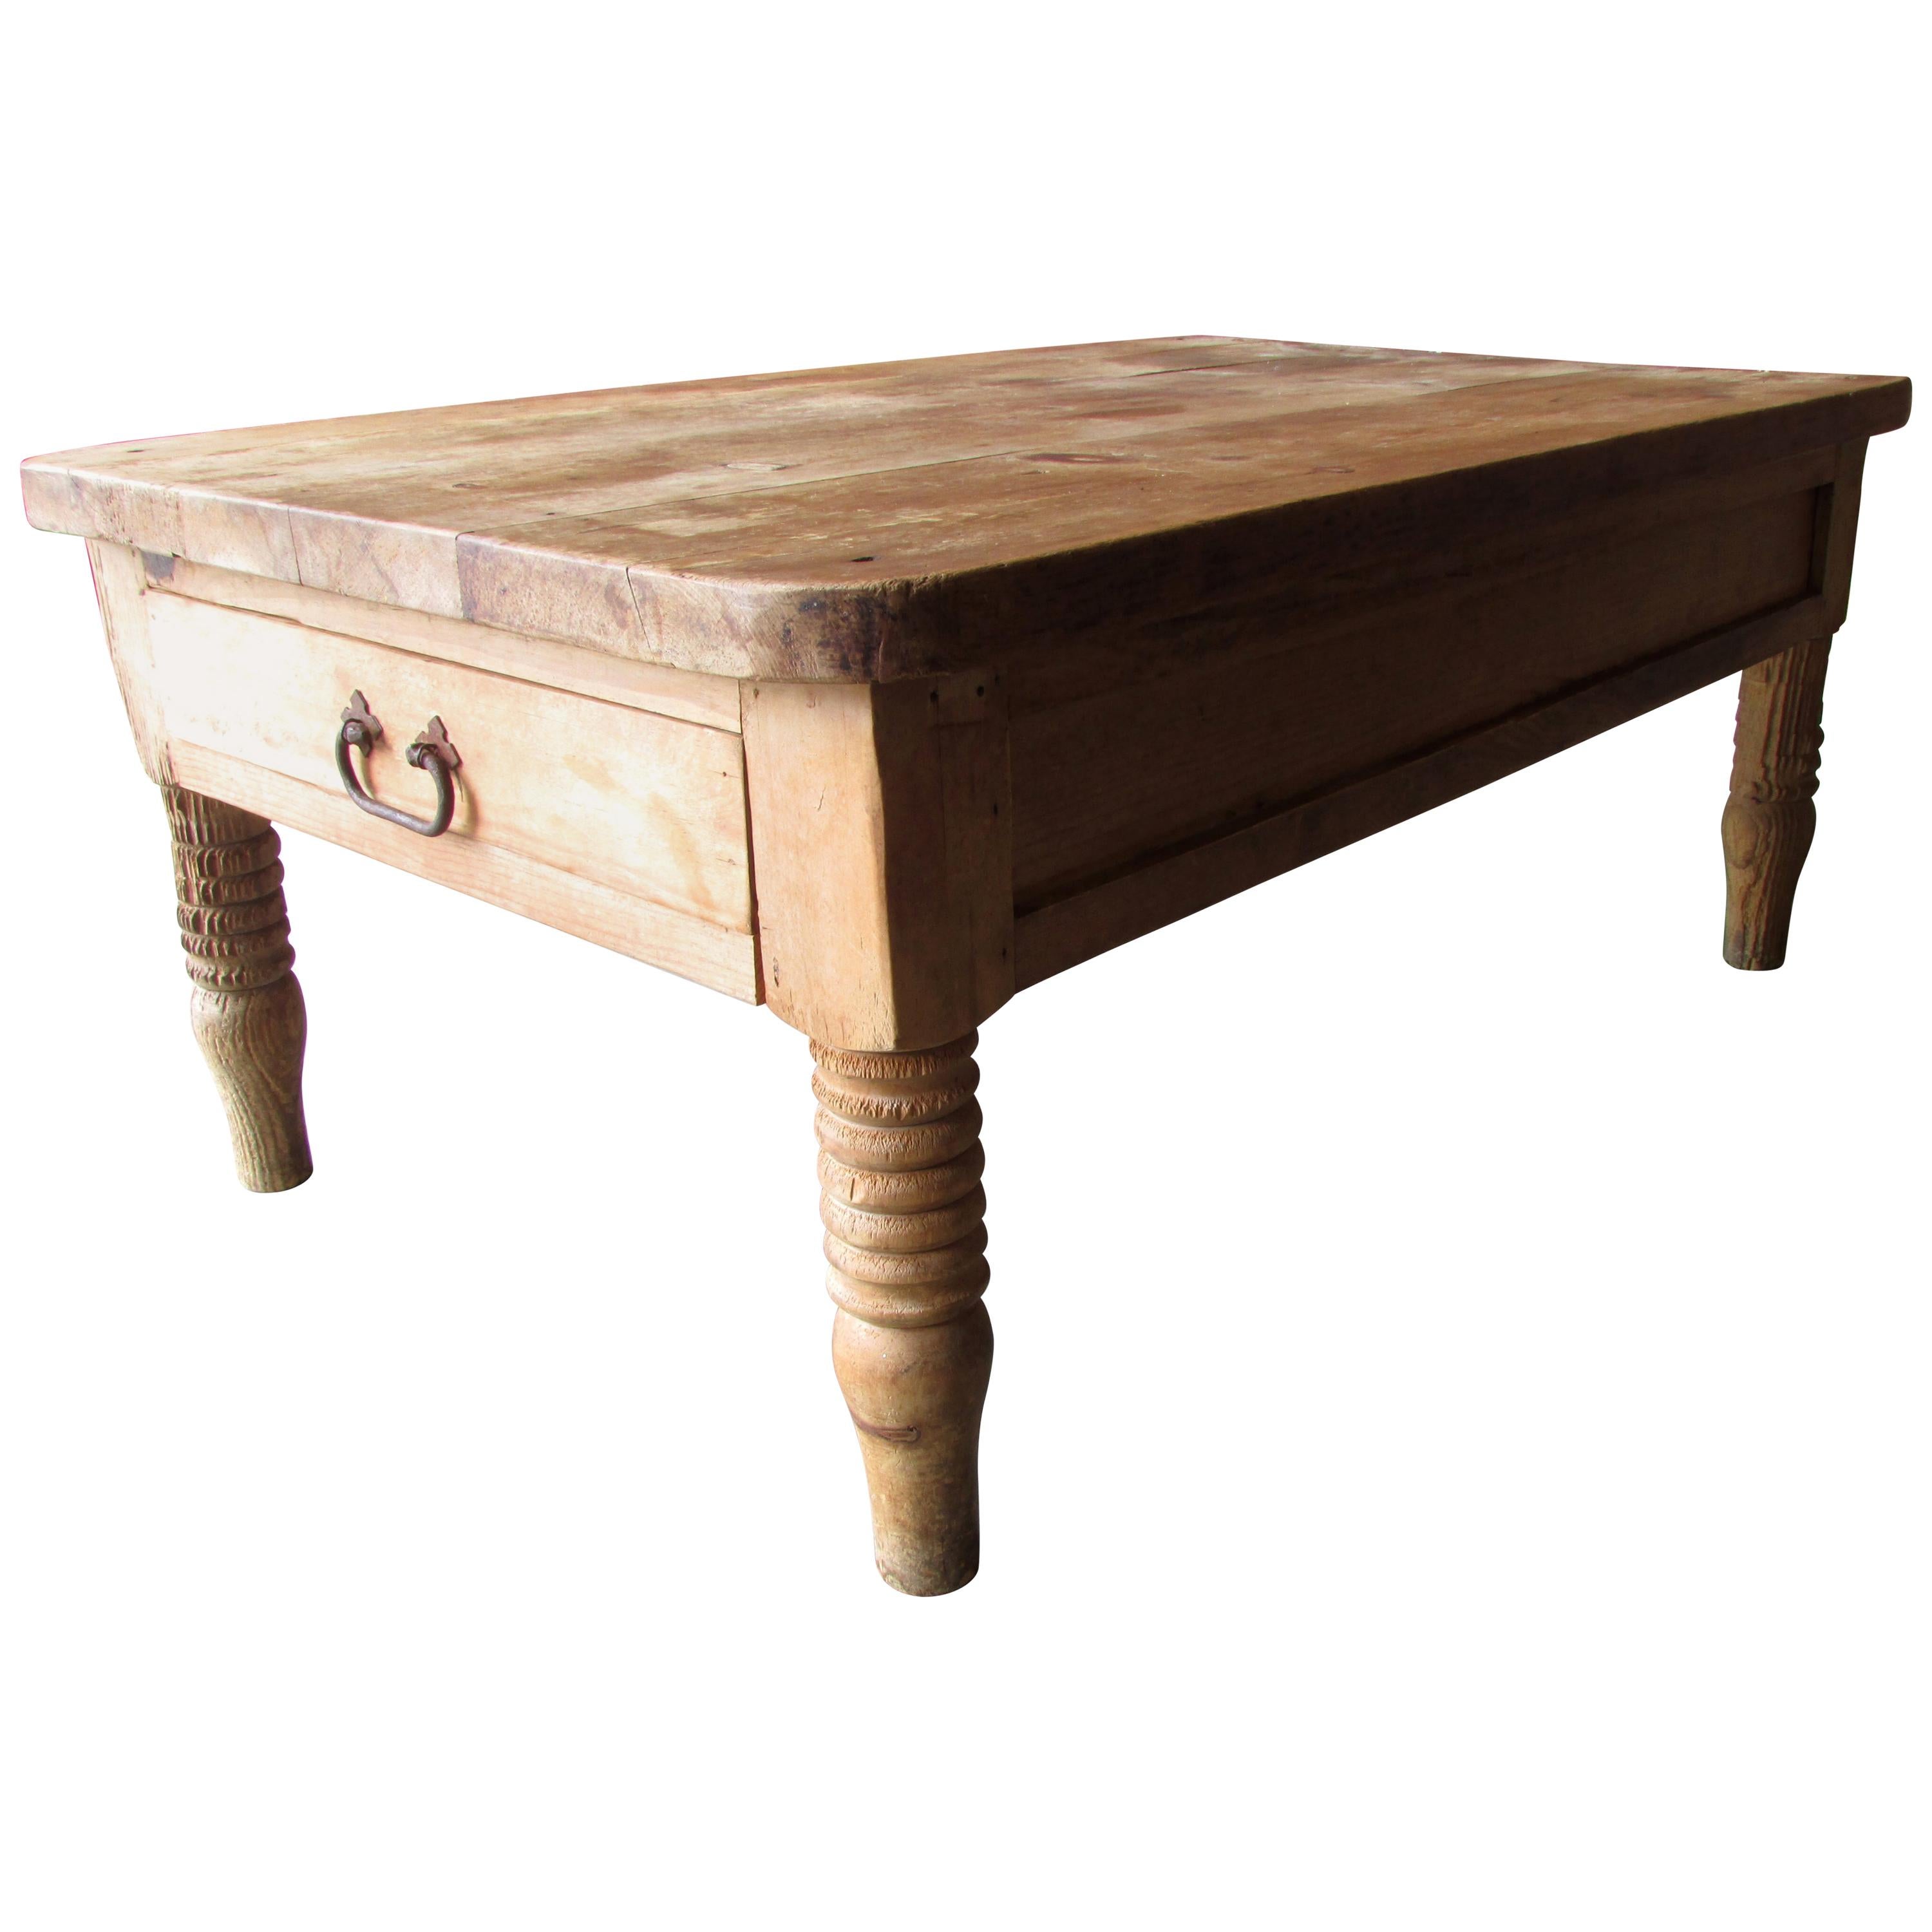 Worn and Weathered Rustic Pine Coffee Table